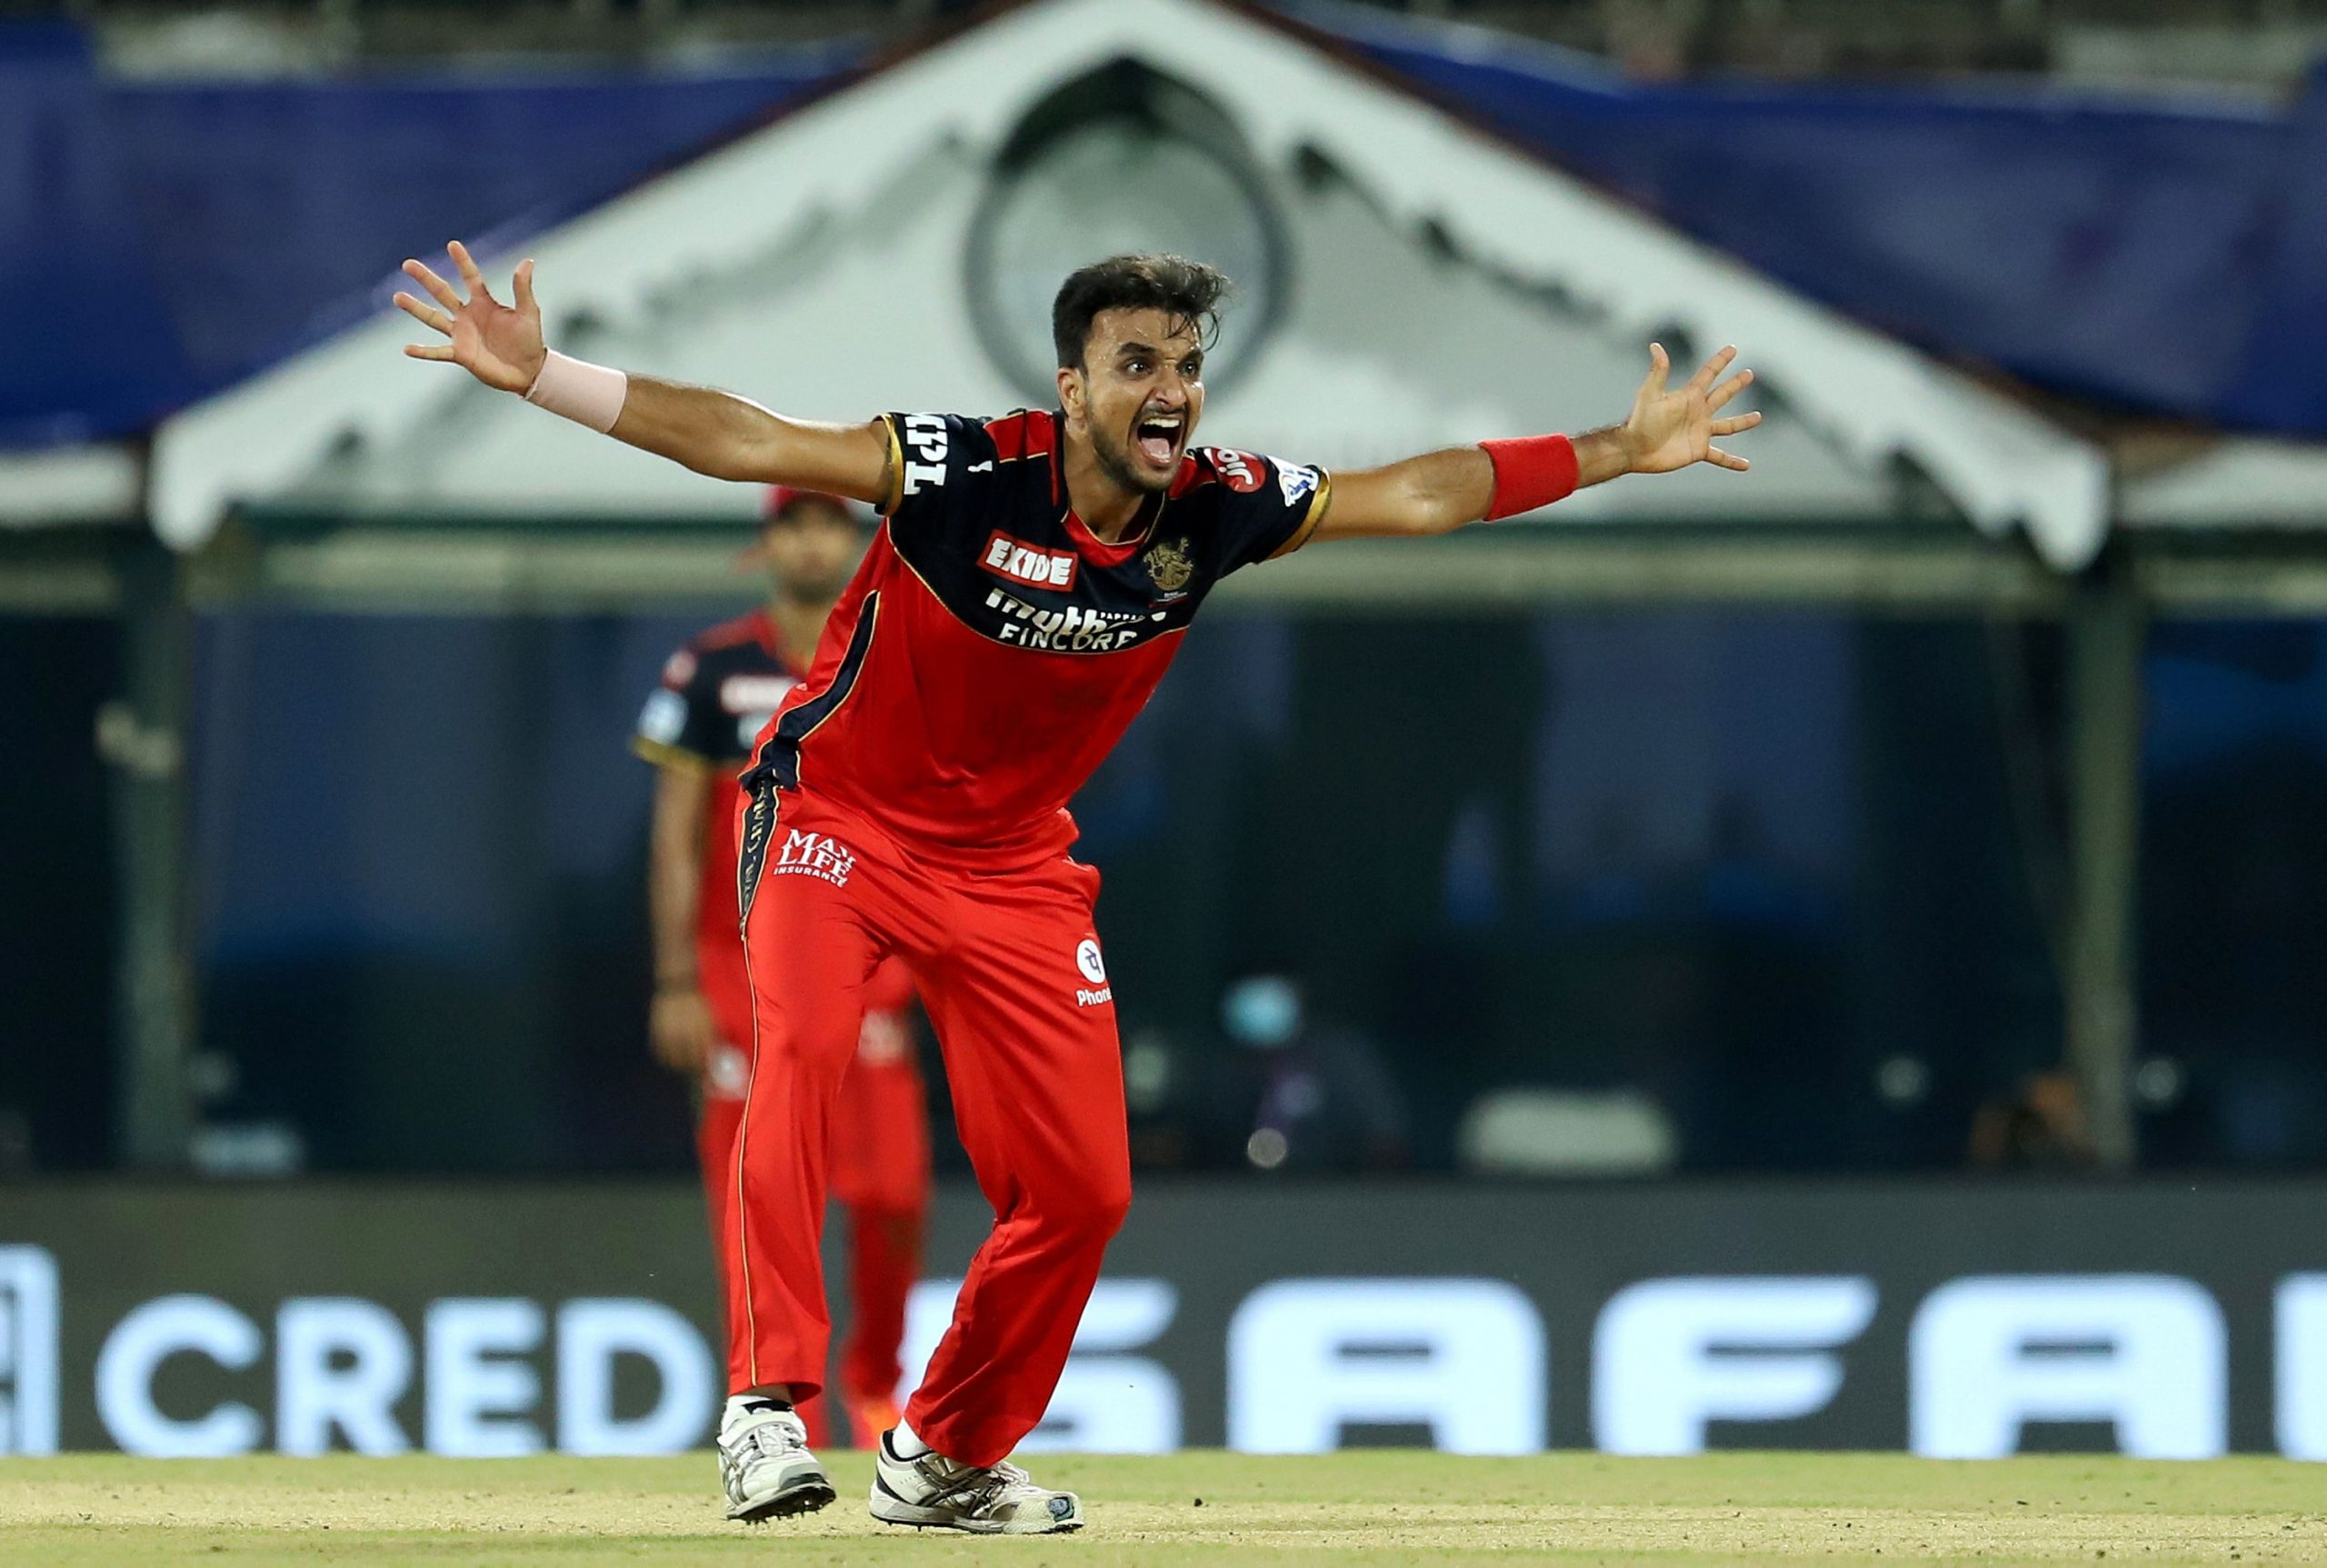 ‘Knew my role,’ says RCB’s Harshal Patel after scoring fifer against MI